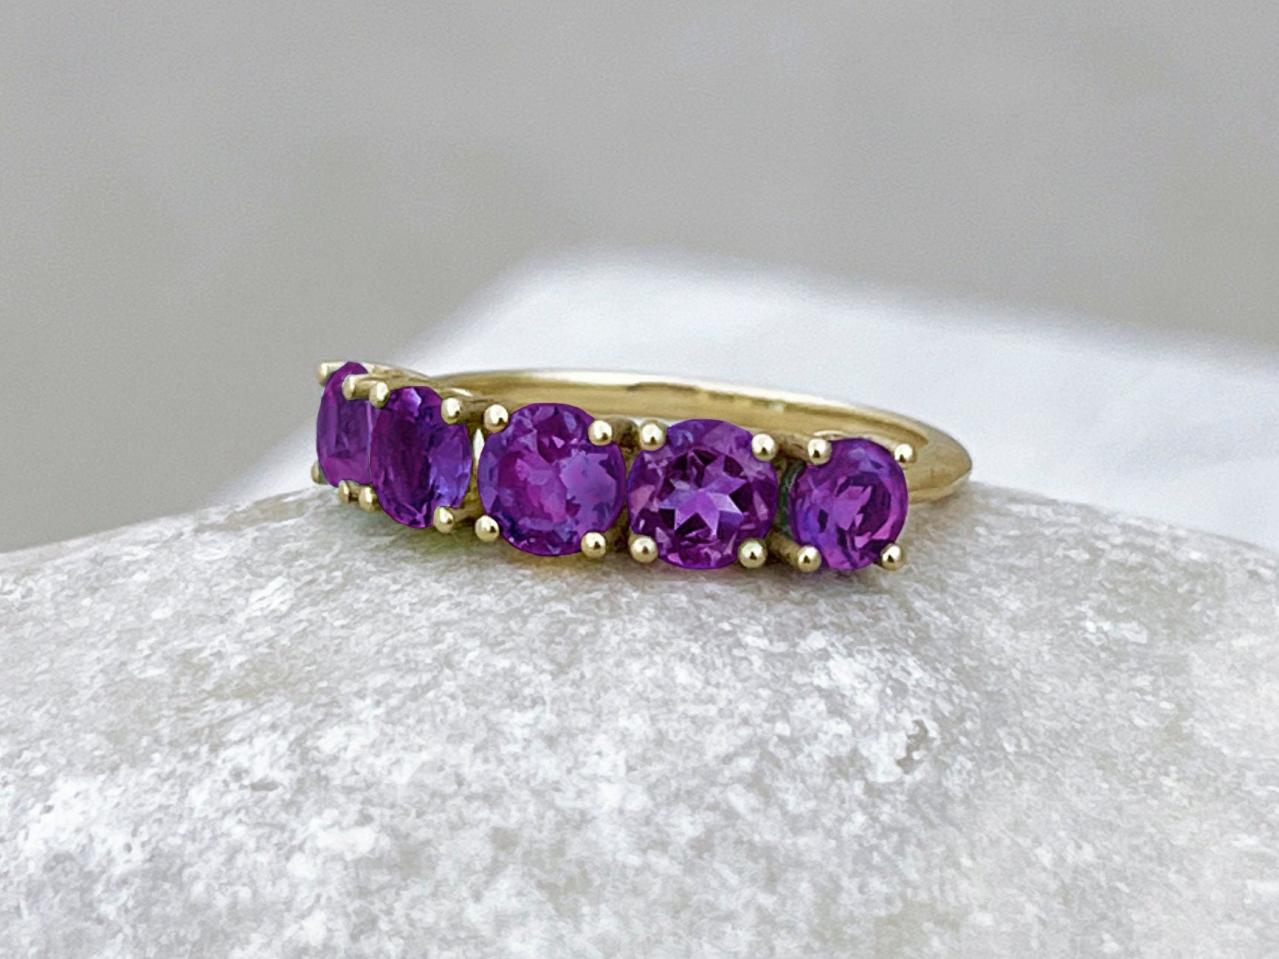 Solid gold engagement ring with round shape amethyst, Bridesmaid half band ring with purple stones, 9k/18k classic prong set promise ring.